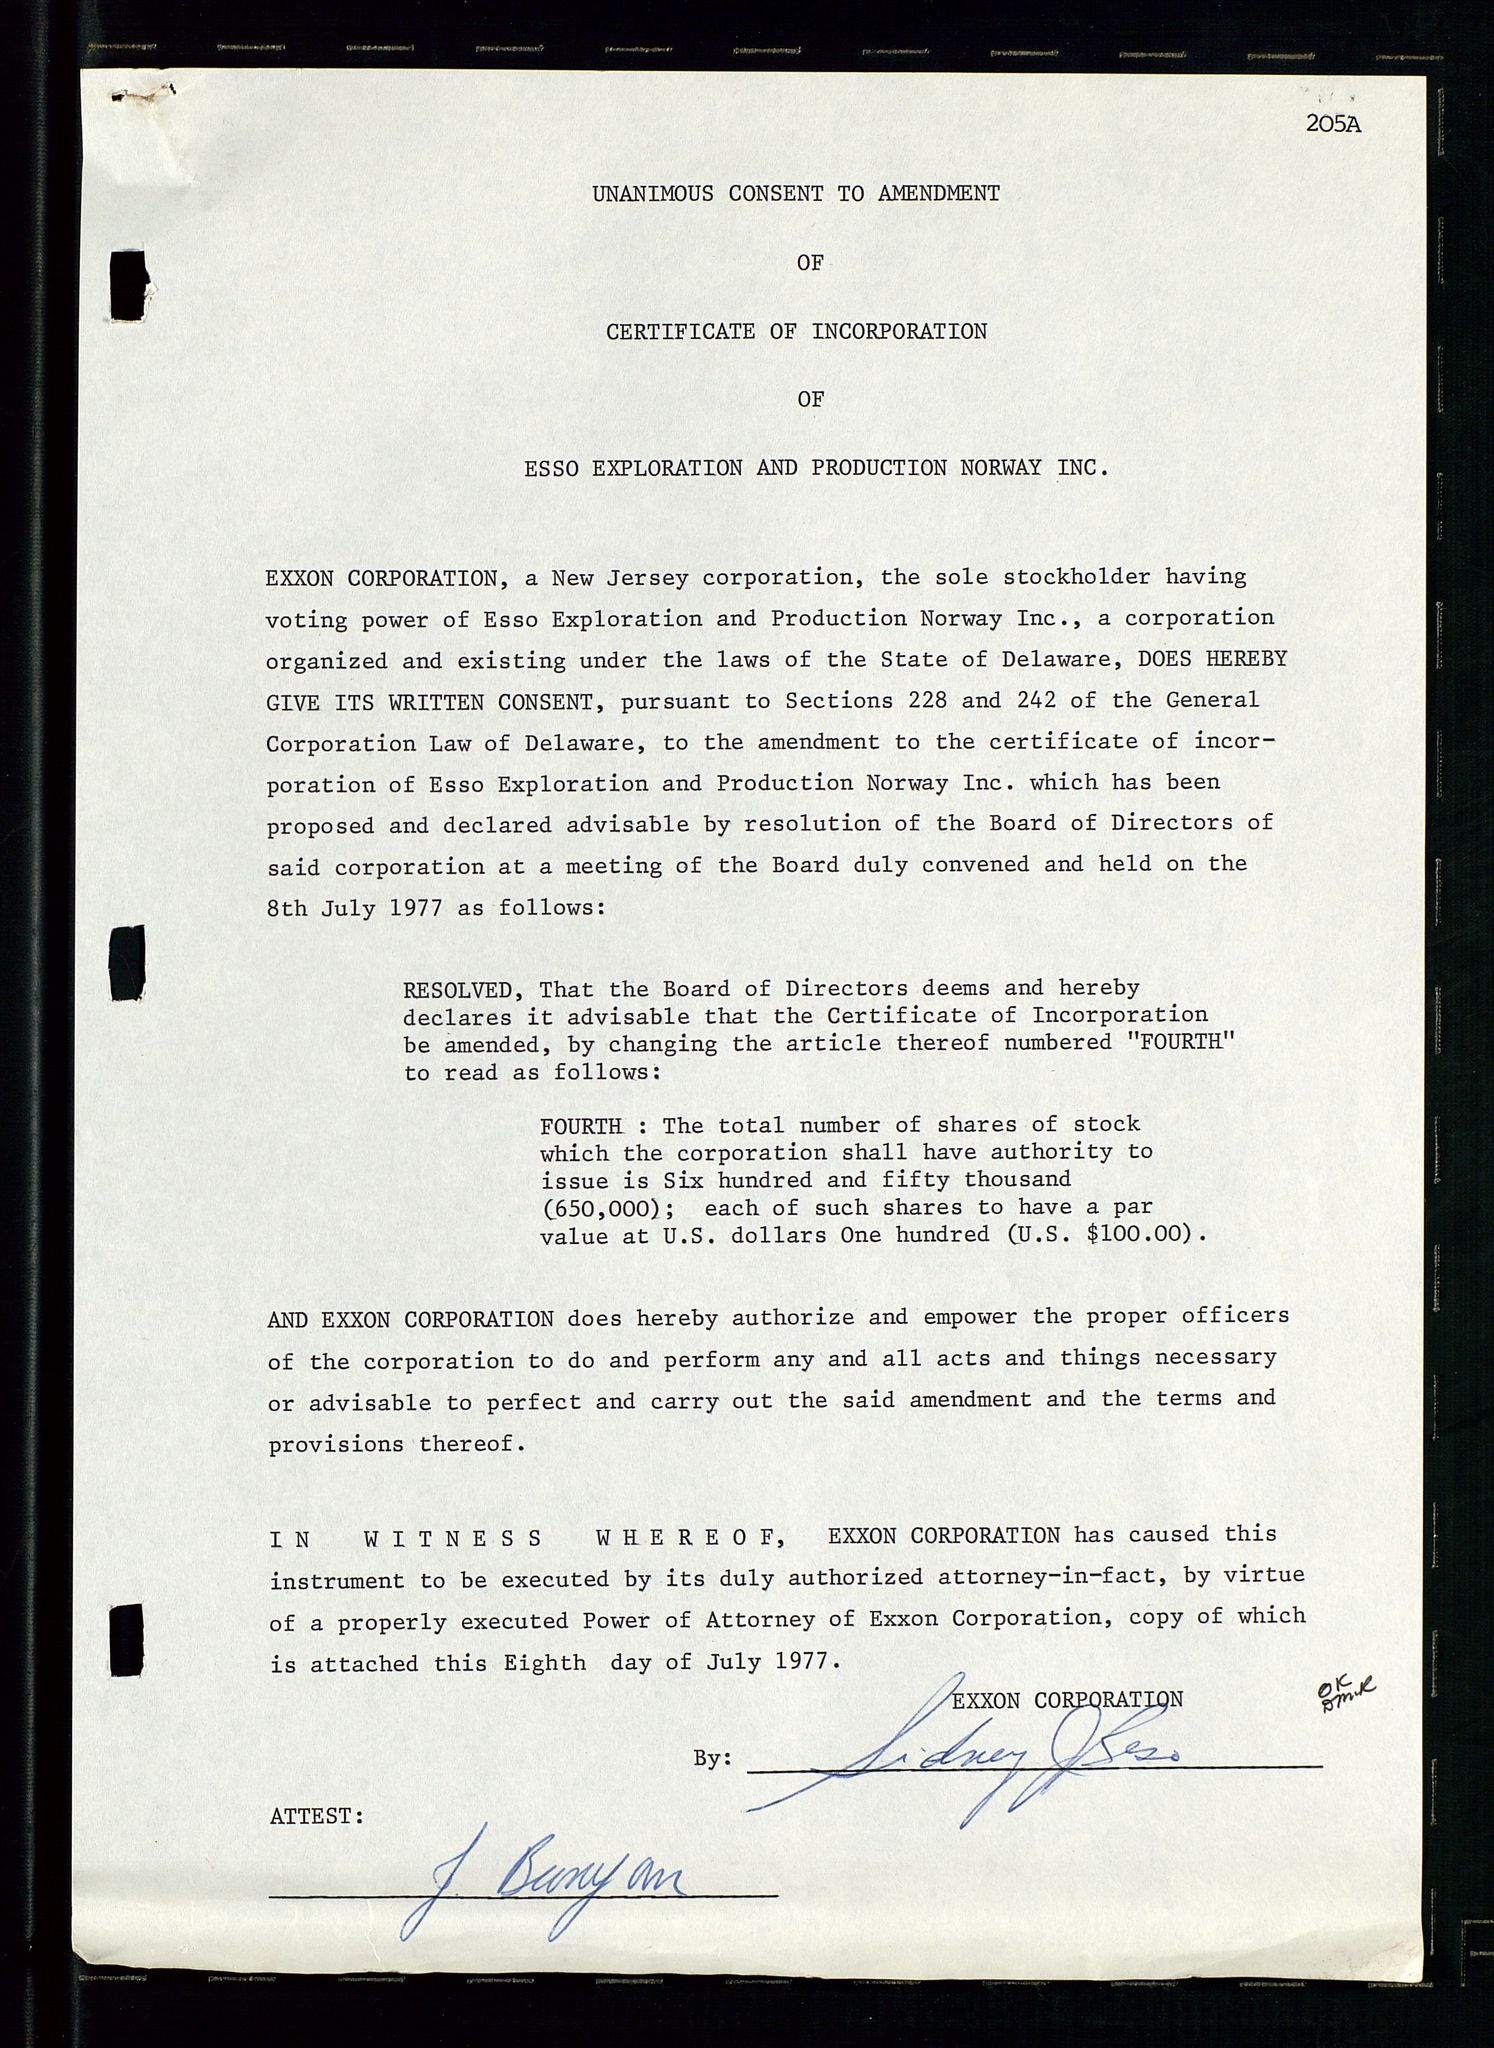 Pa 1512 - Esso Exploration and Production Norway Inc., SAST/A-101917/A/Aa/L0001/0002: Styredokumenter / Corporate records, Board meeting minutes, Agreements, Stocholder meetings, 1975-1979, p. 57